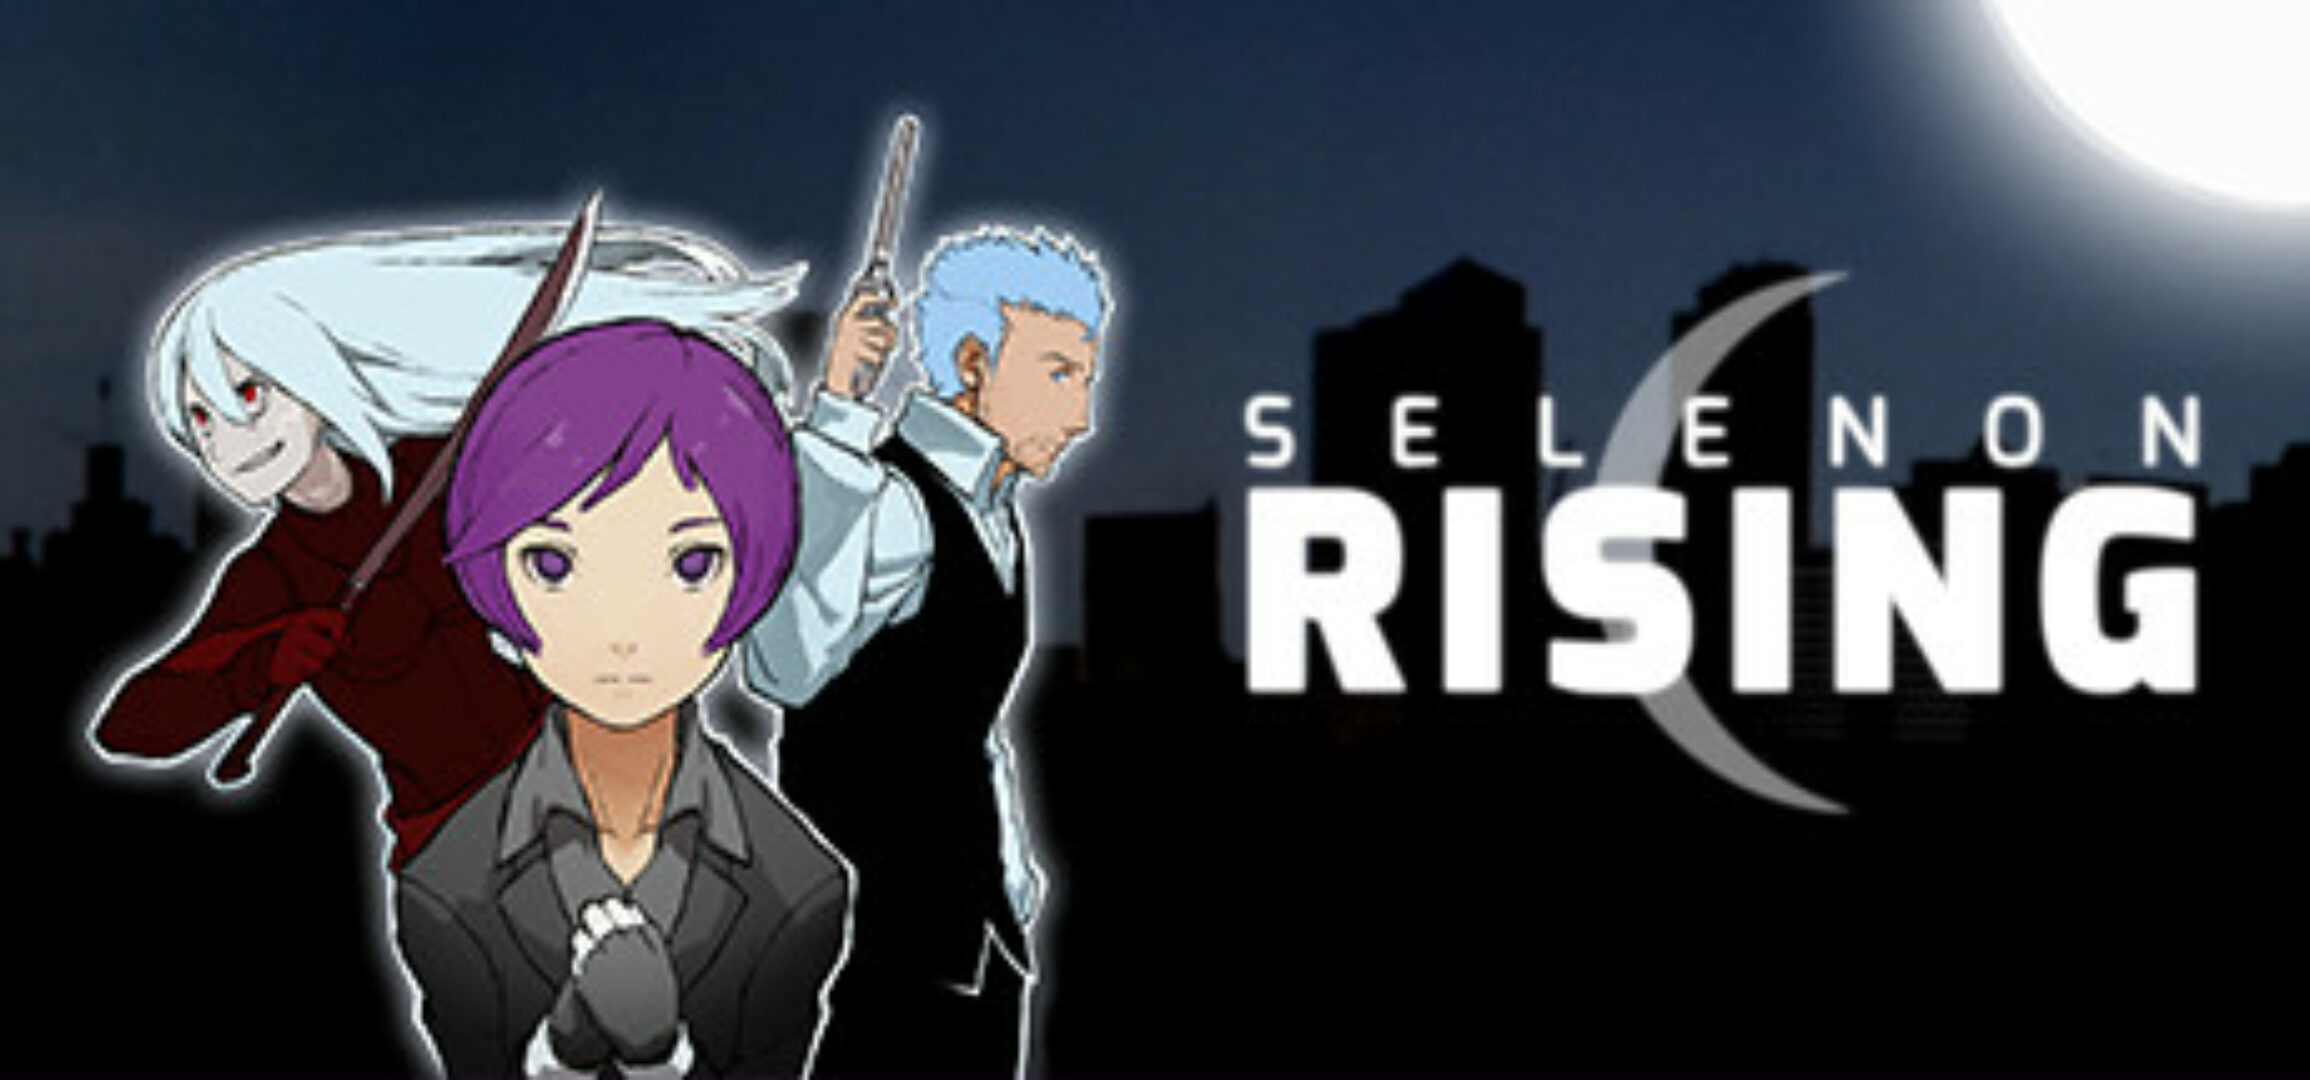 Use Psychic Abilities to Decide Humanities Fate in Selenon Rising